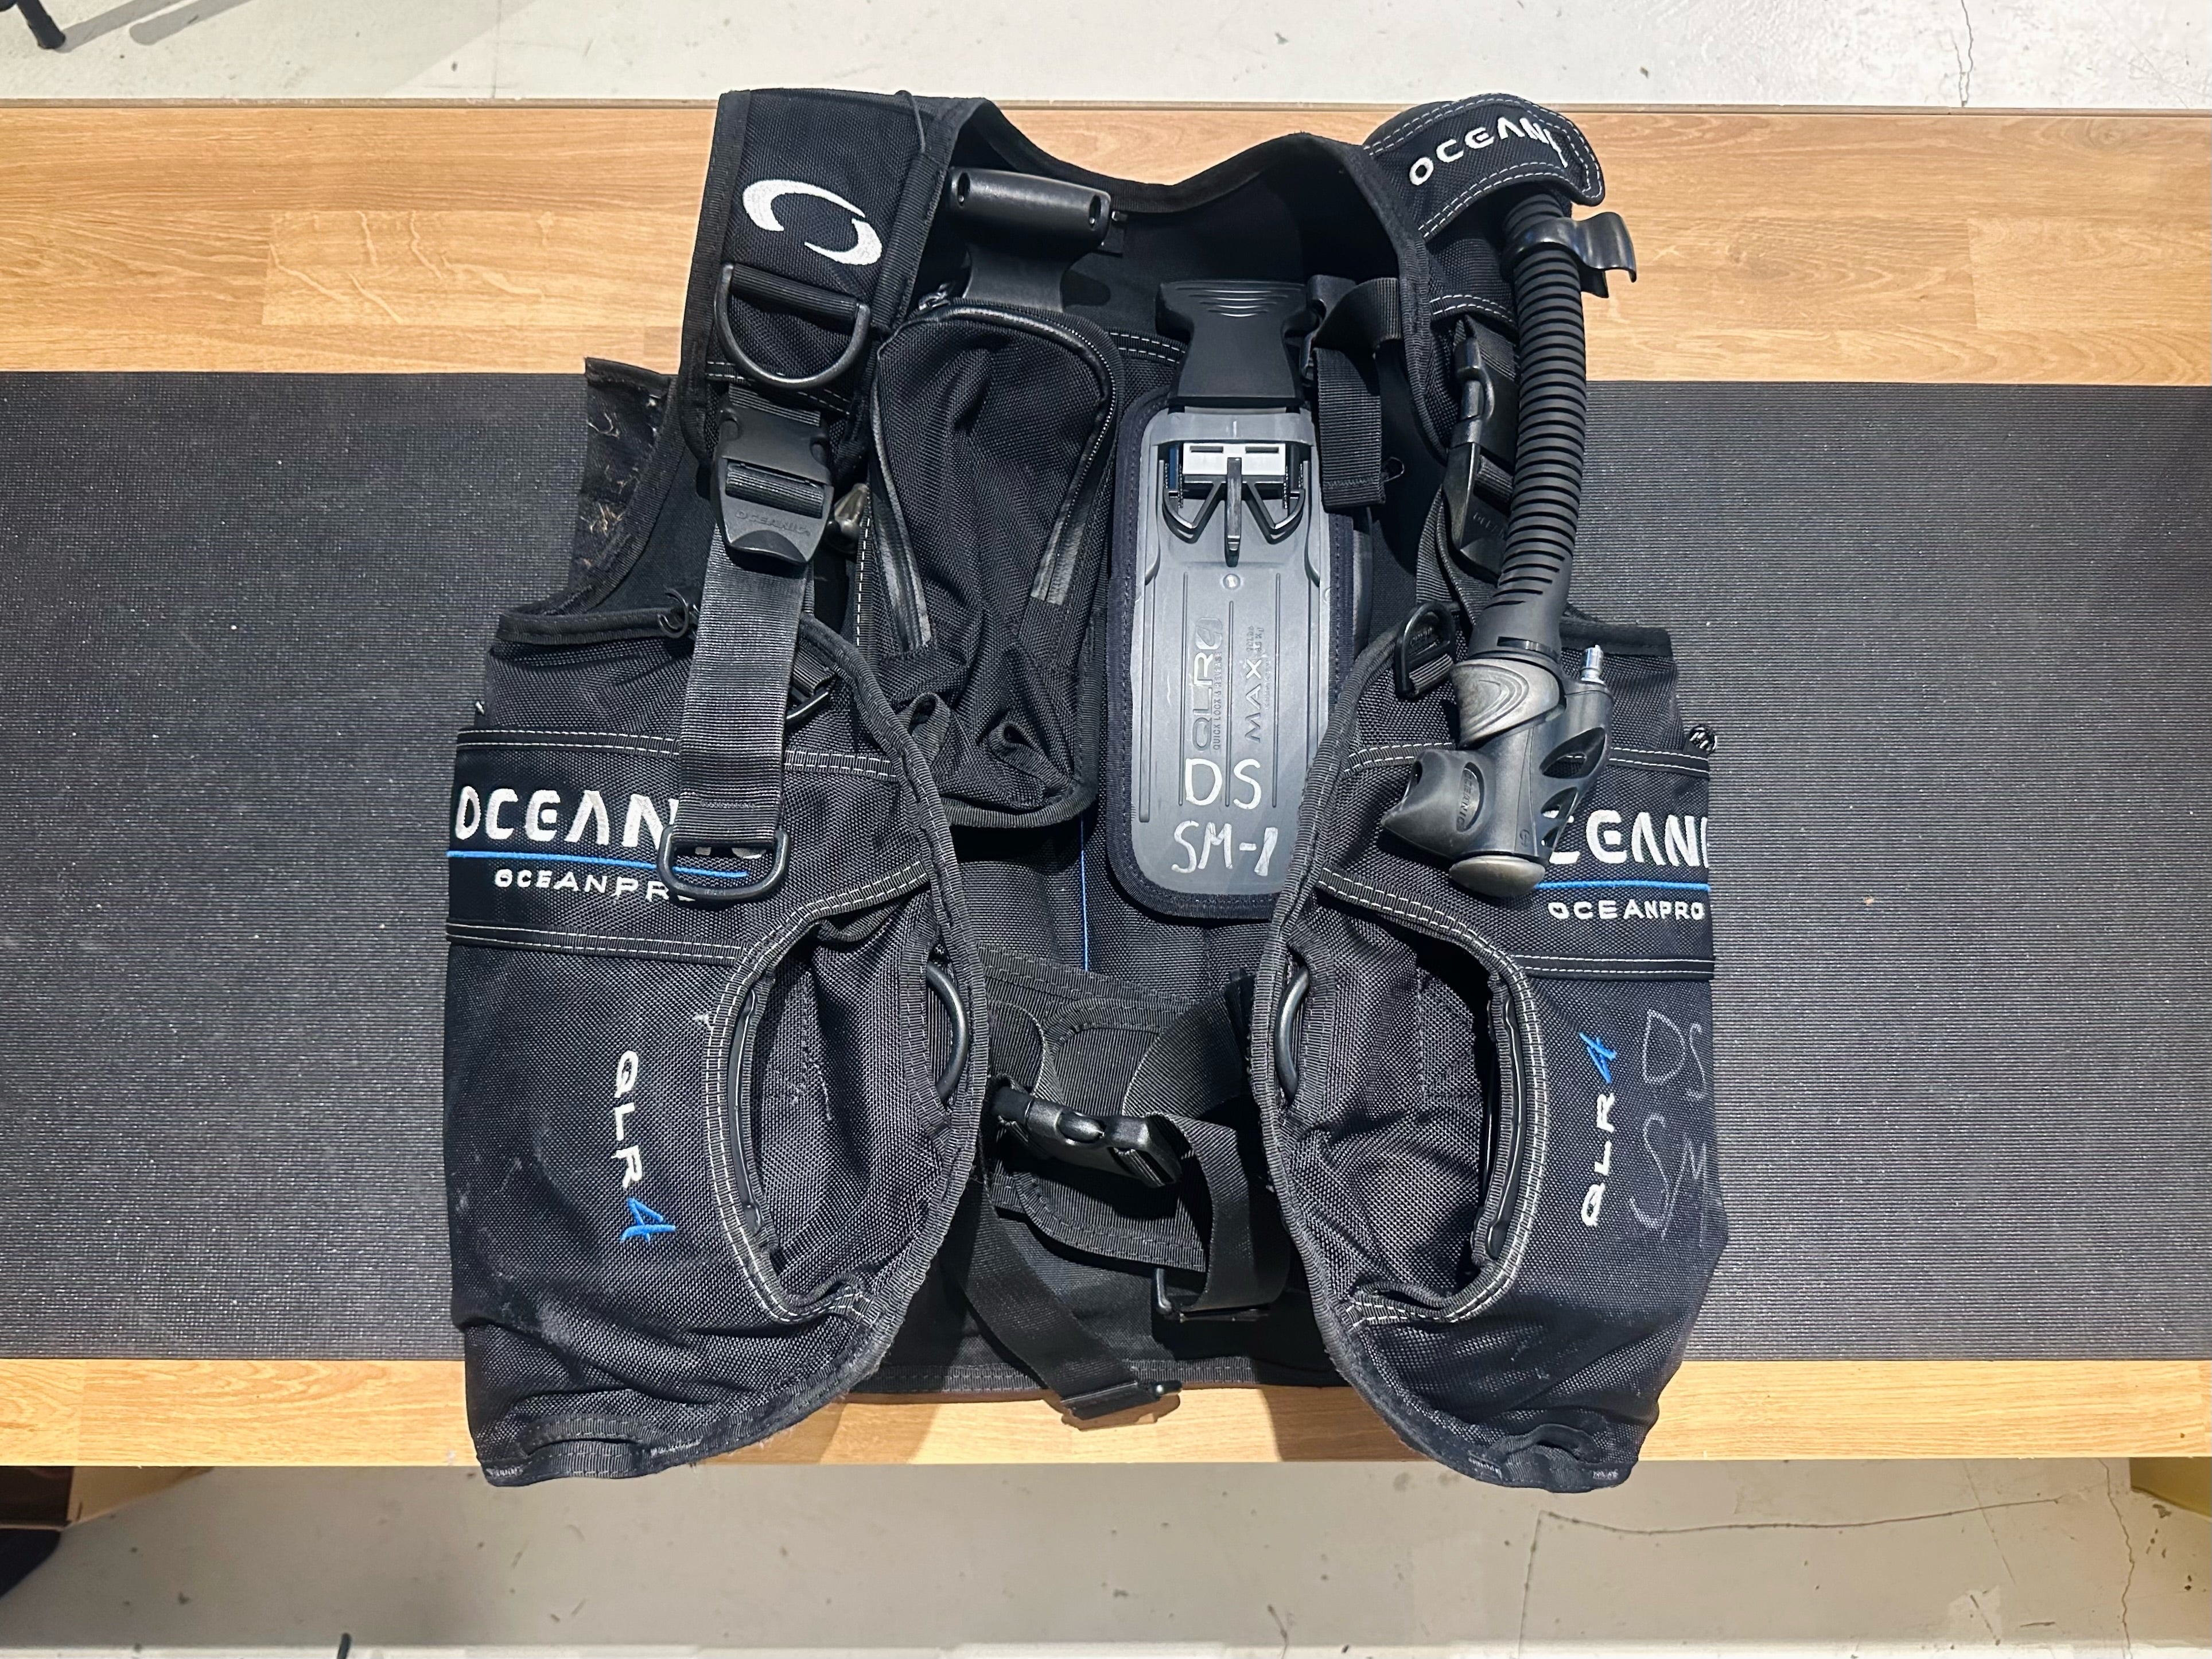 Oceanic OceanPro Used Size Small